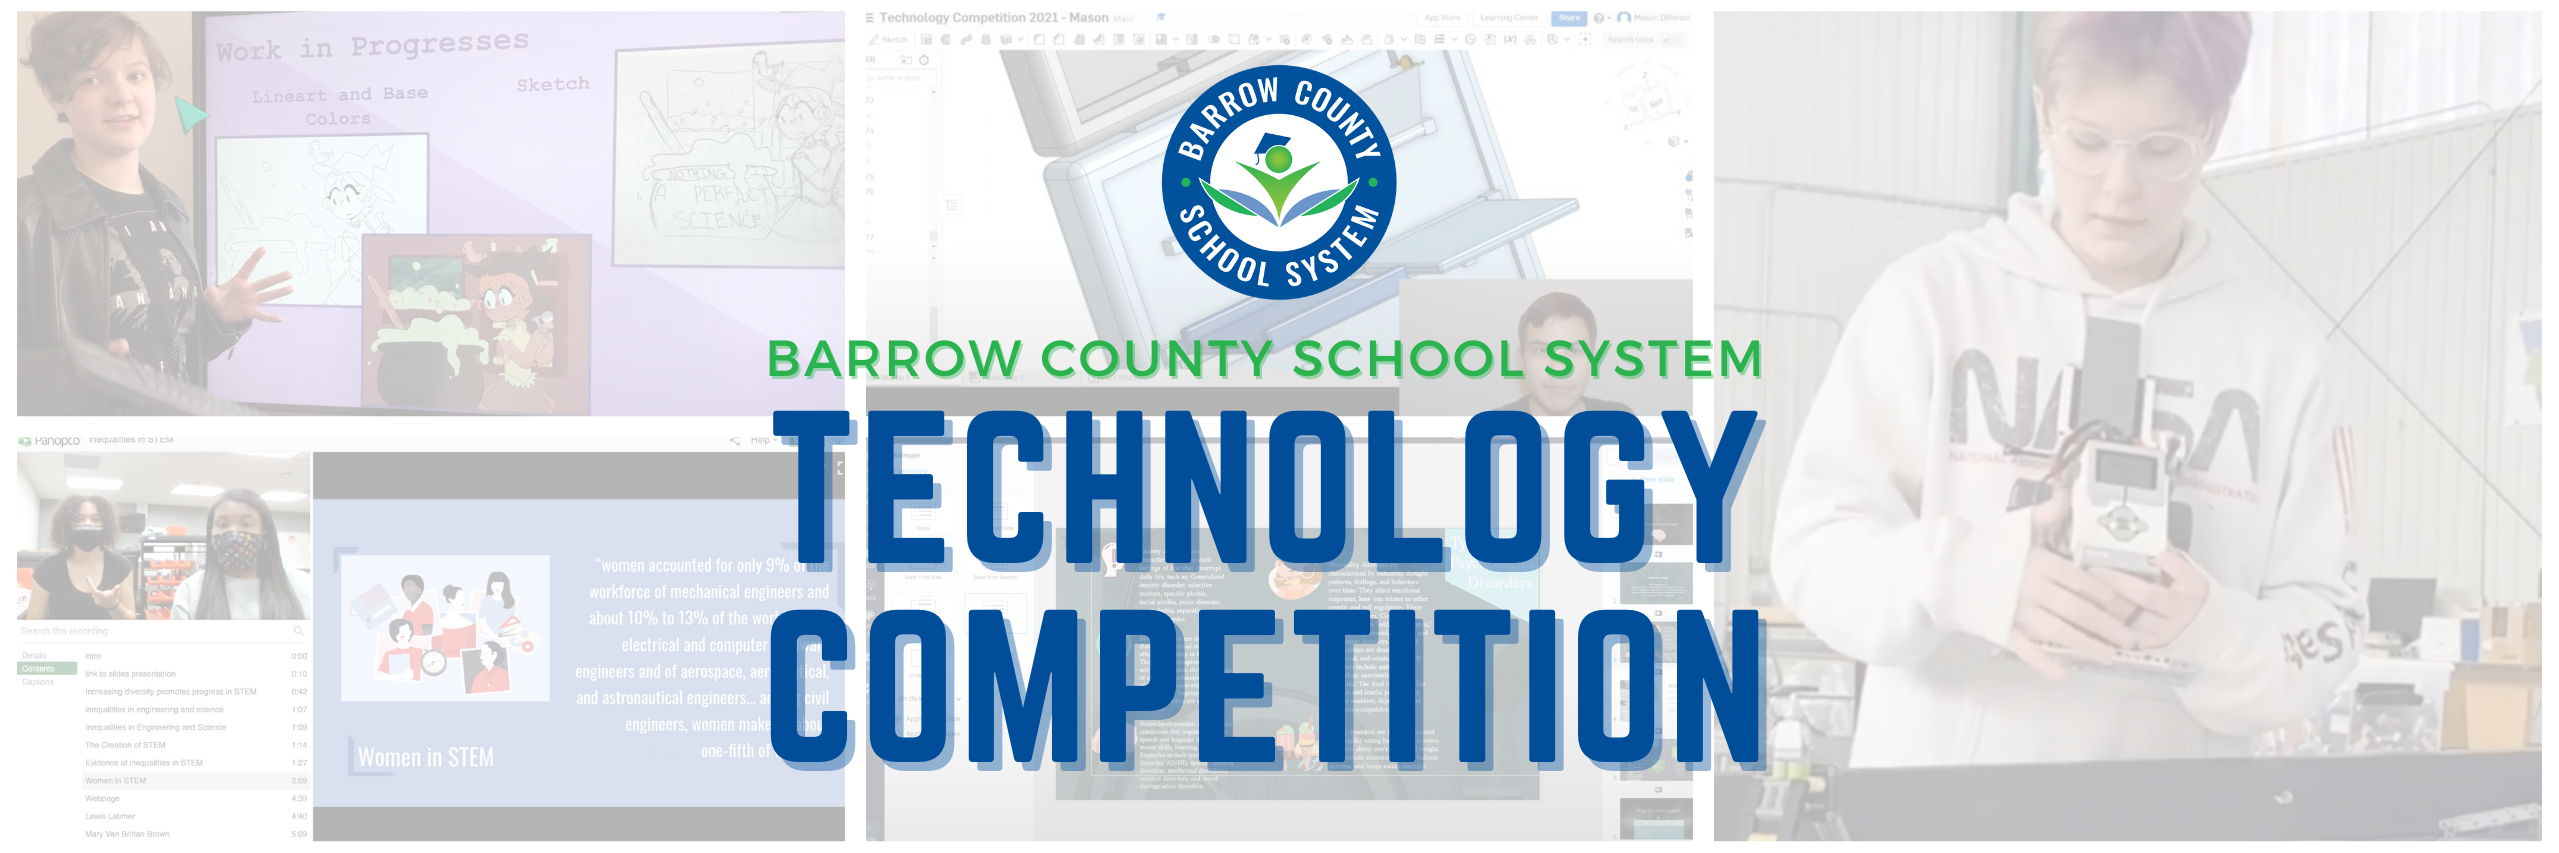 BCSS Technology Competition header image